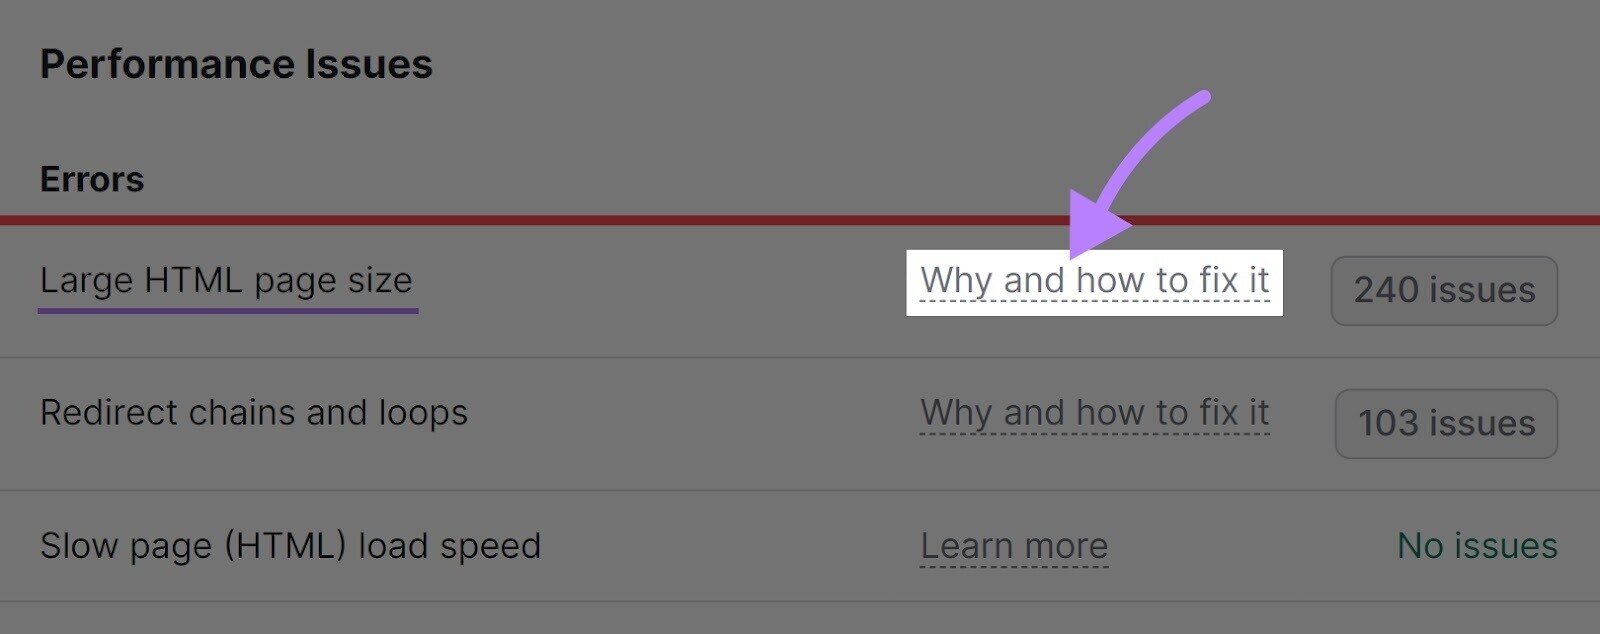 “Why and how to fix it” button highlighted